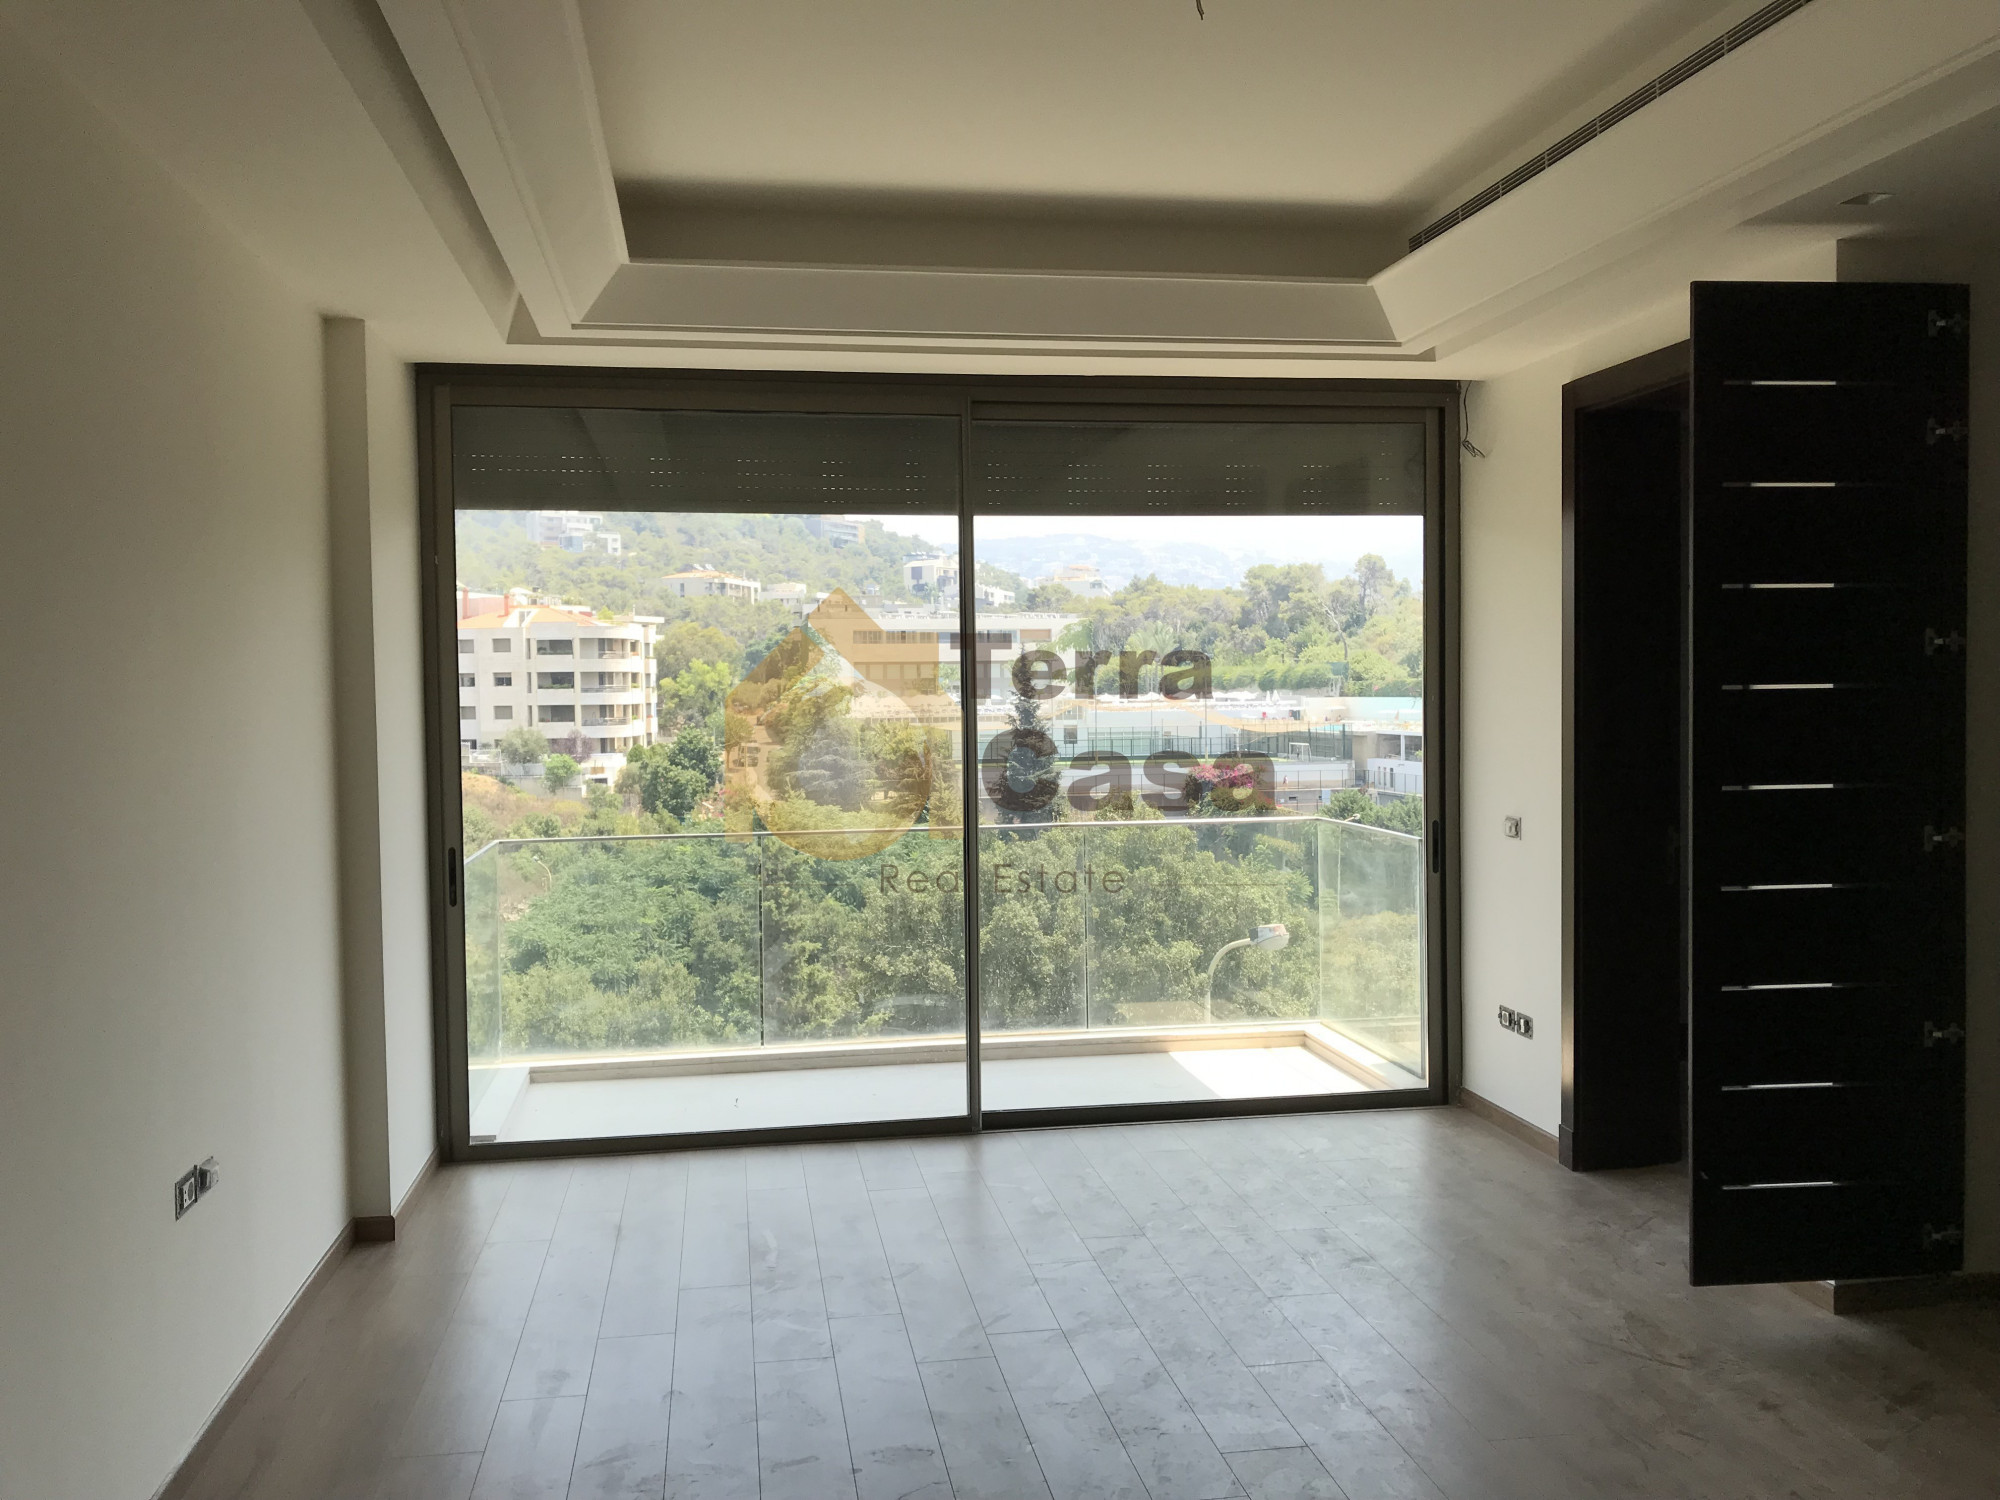 Super Deluxe apartment for sale in Yarzeh with garden